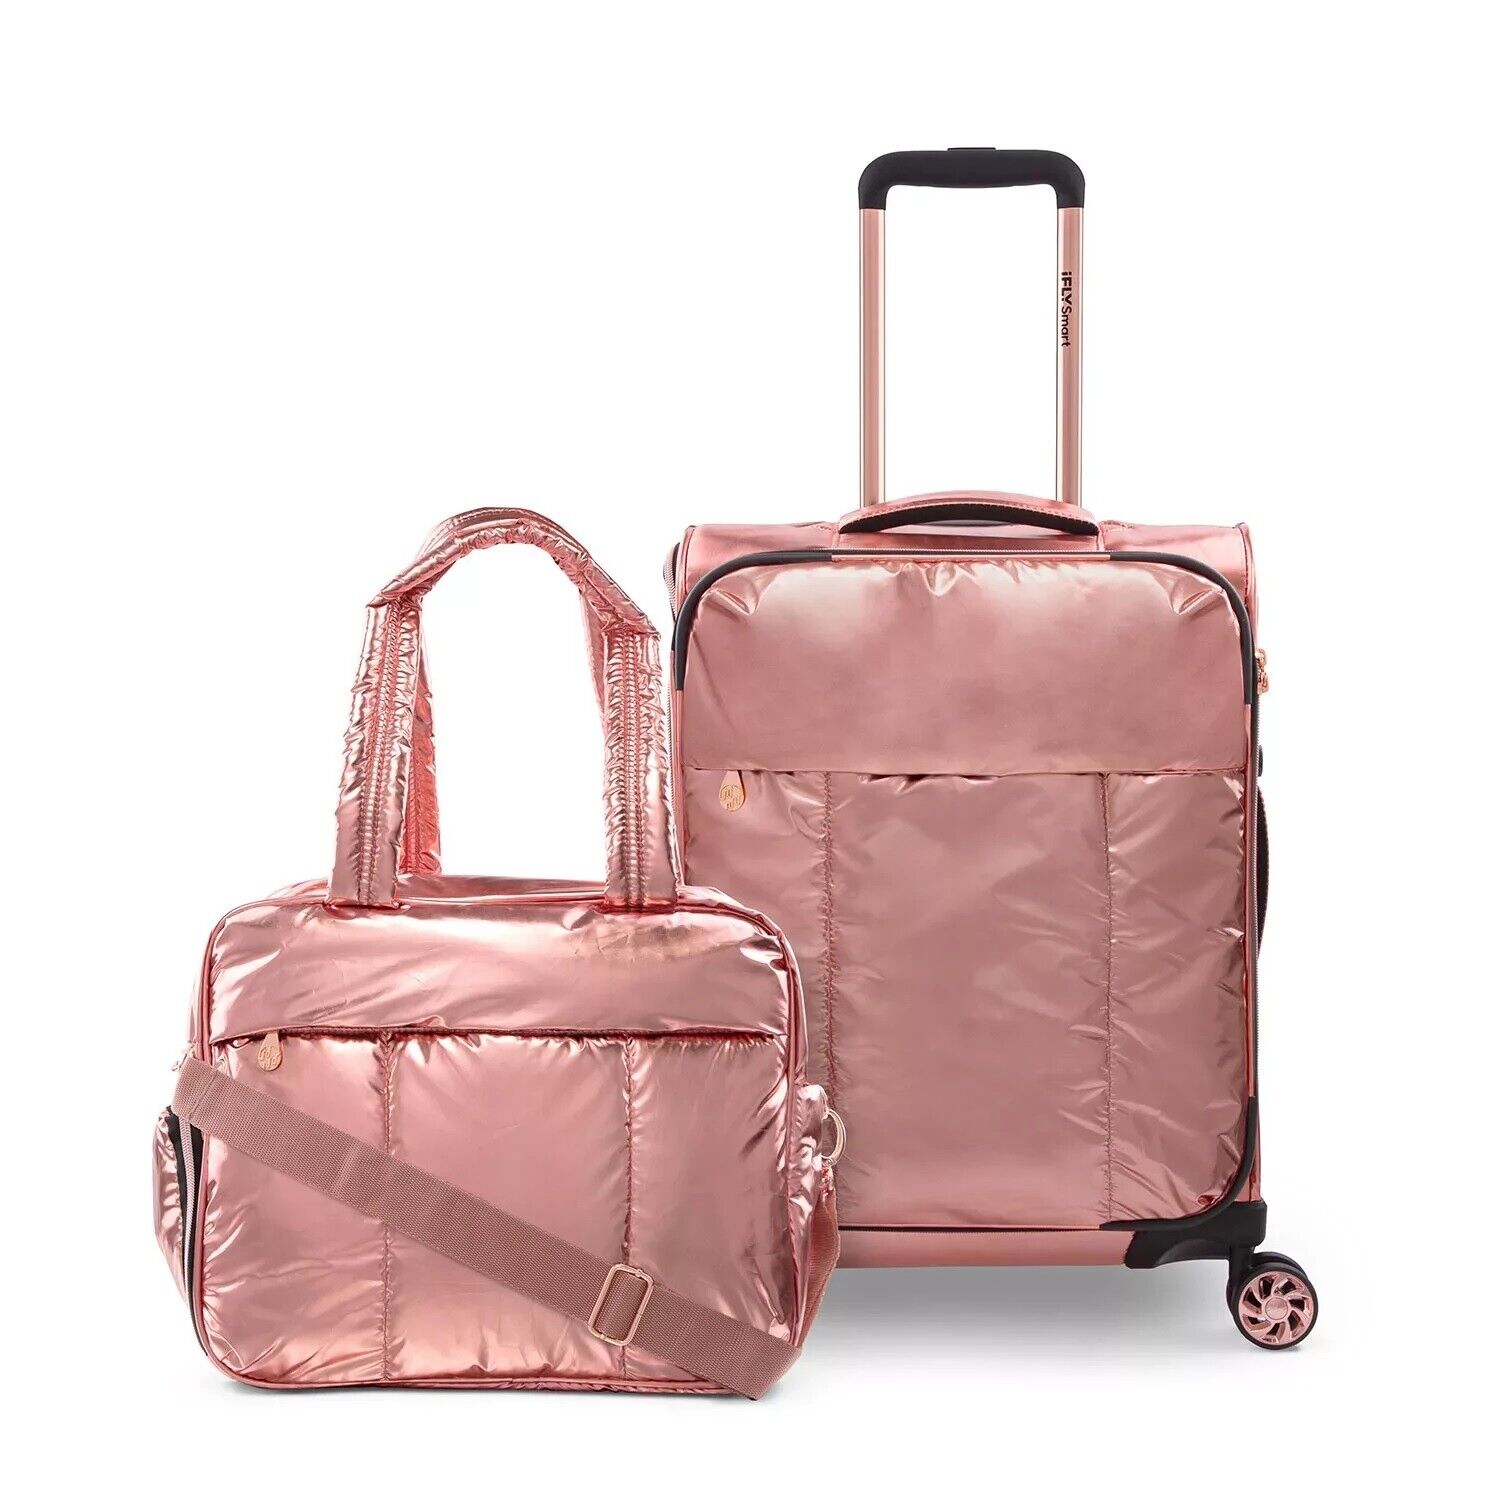 Ifly Smart Glow Collection 2-piece Carry-on Travel Set, Rose Gold